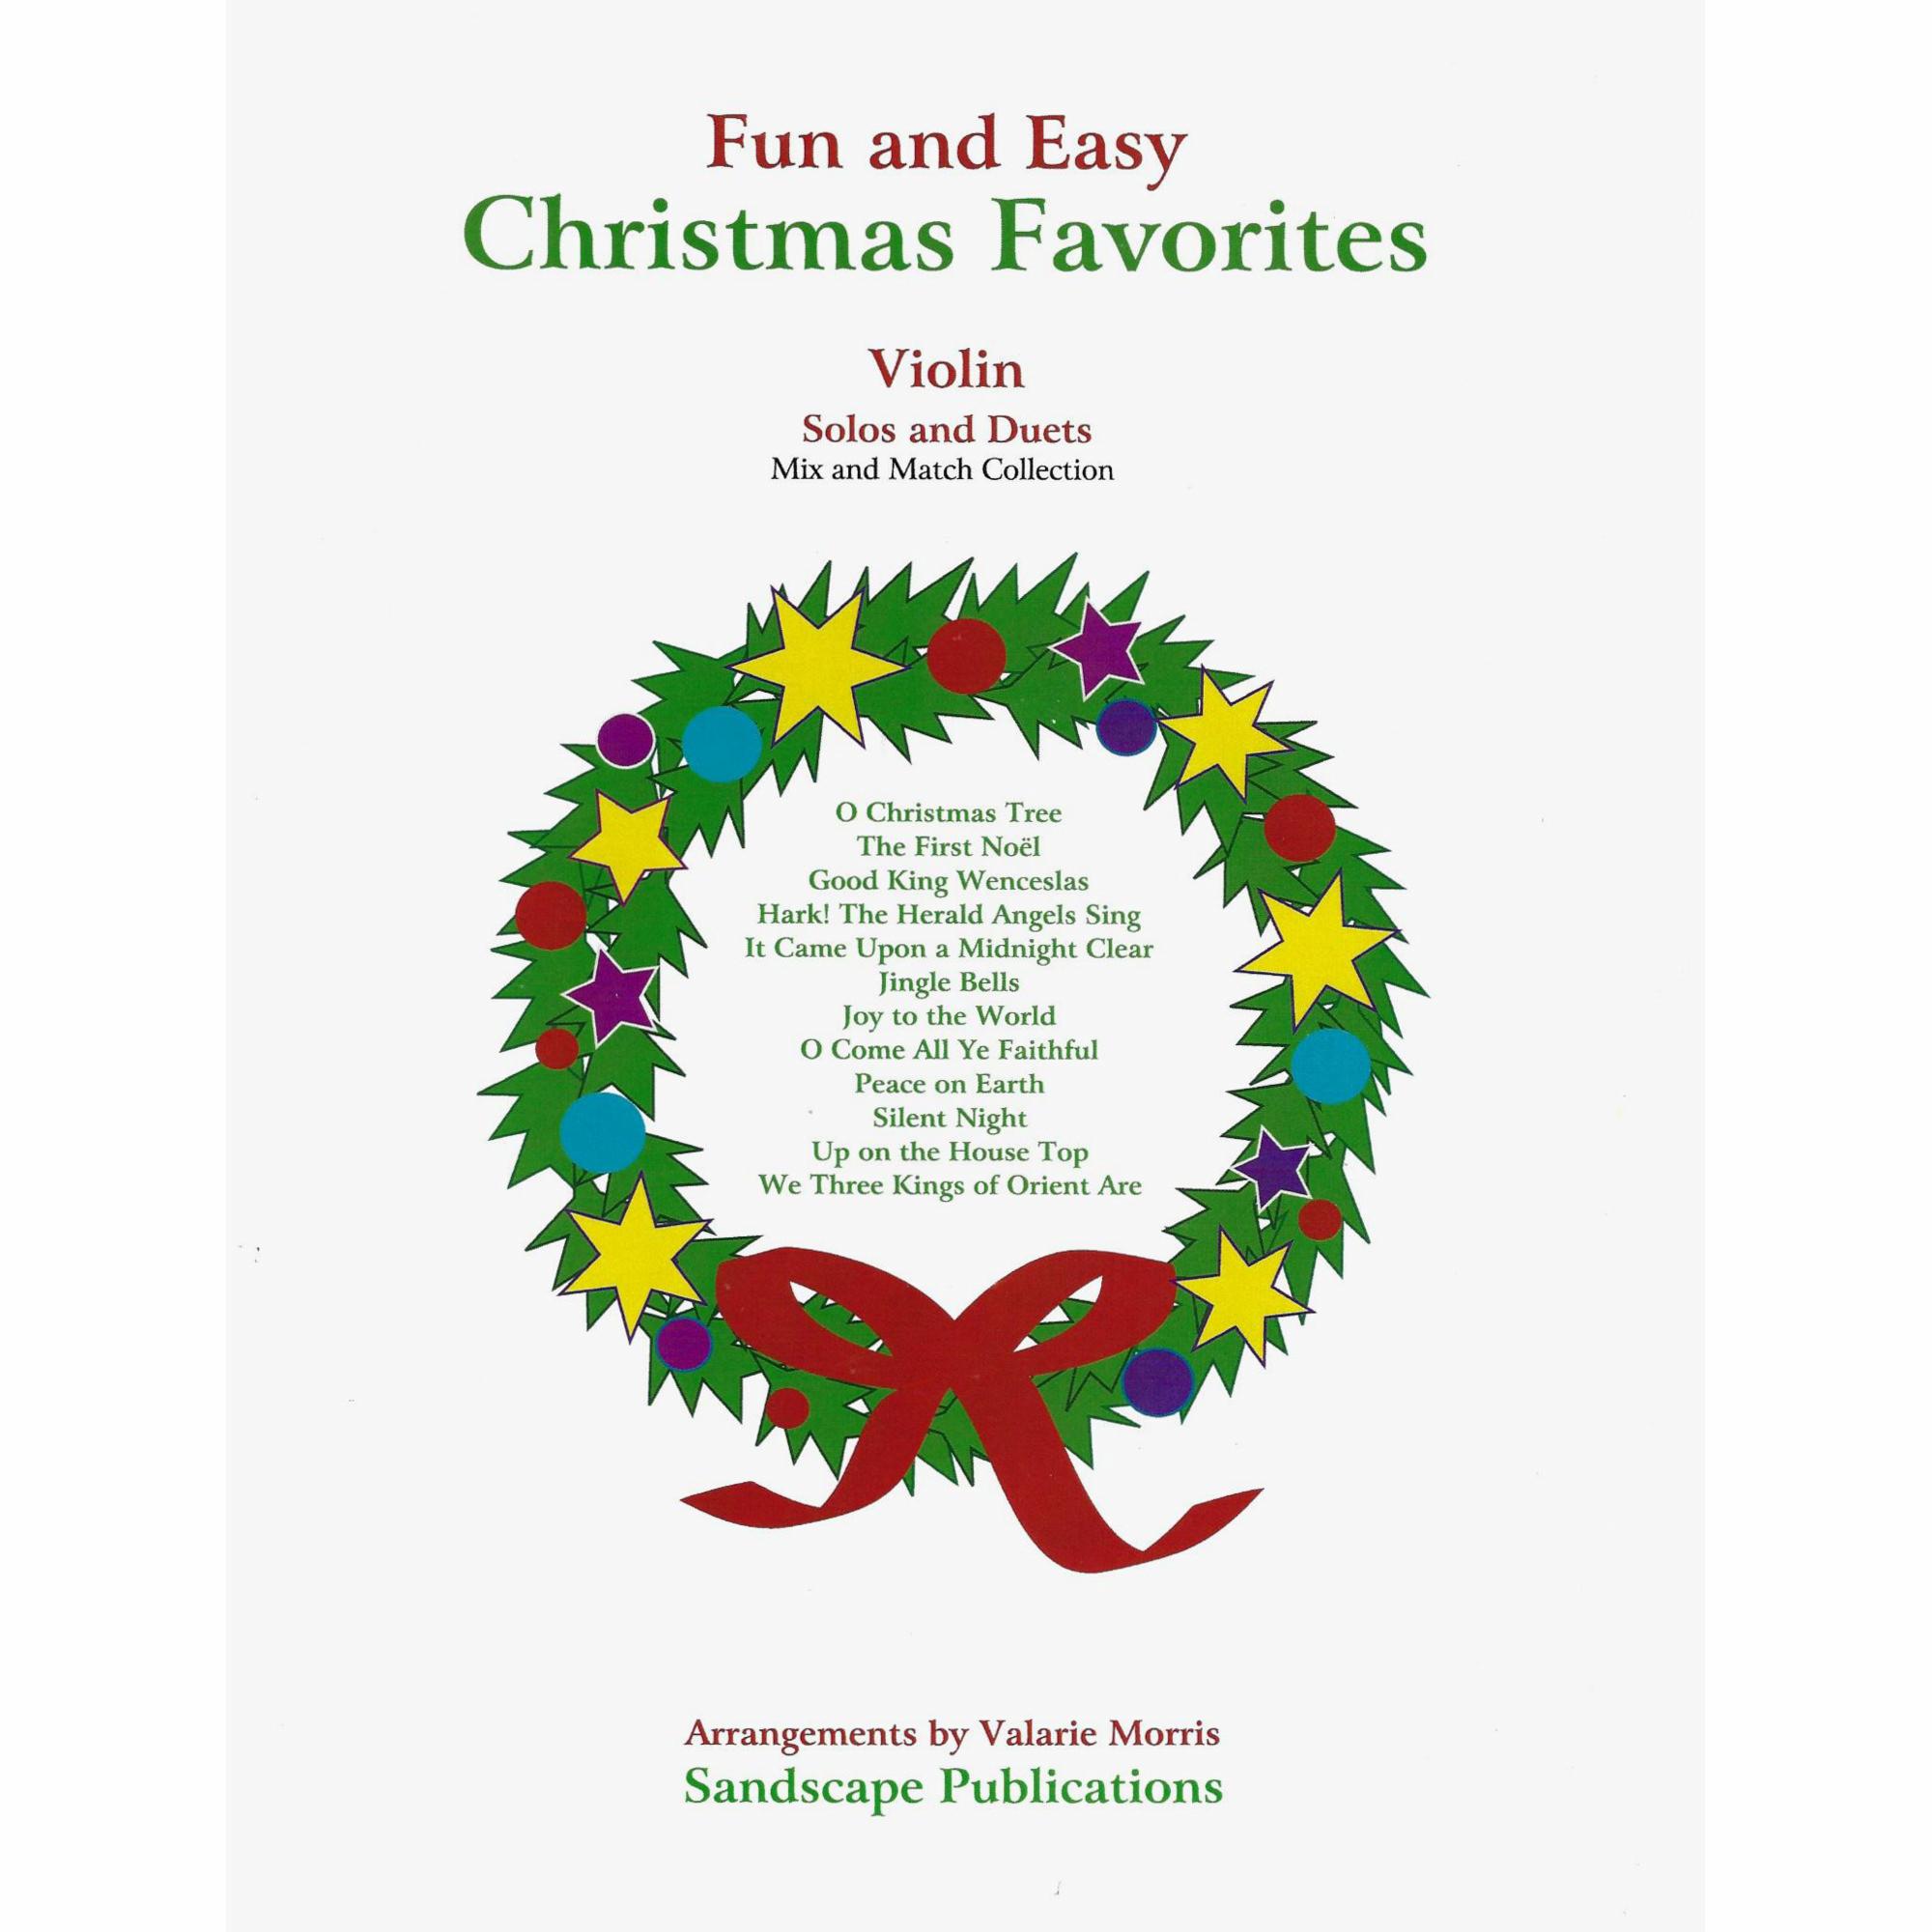 Fun and Easy Christmas Favorites for Solo and Duets